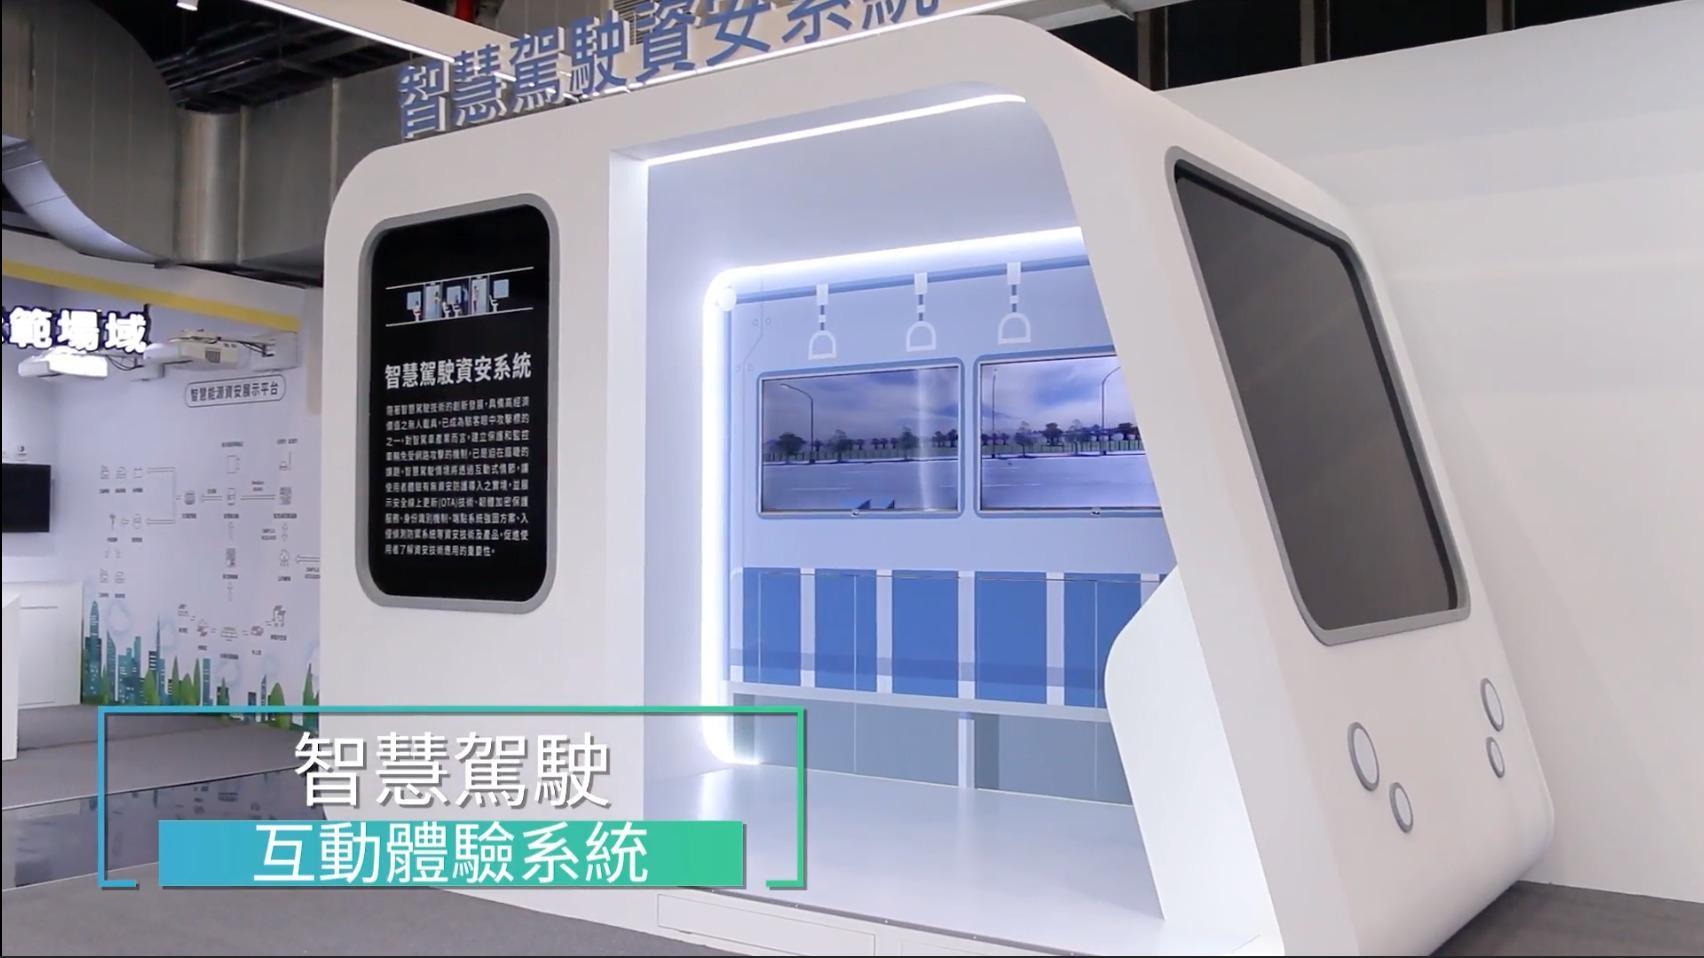 Wang Yi Design, Exhibition Design, Somatosensory Interactive Game, King One Design, Sharon Information Security Service Base, Interactive Experience System